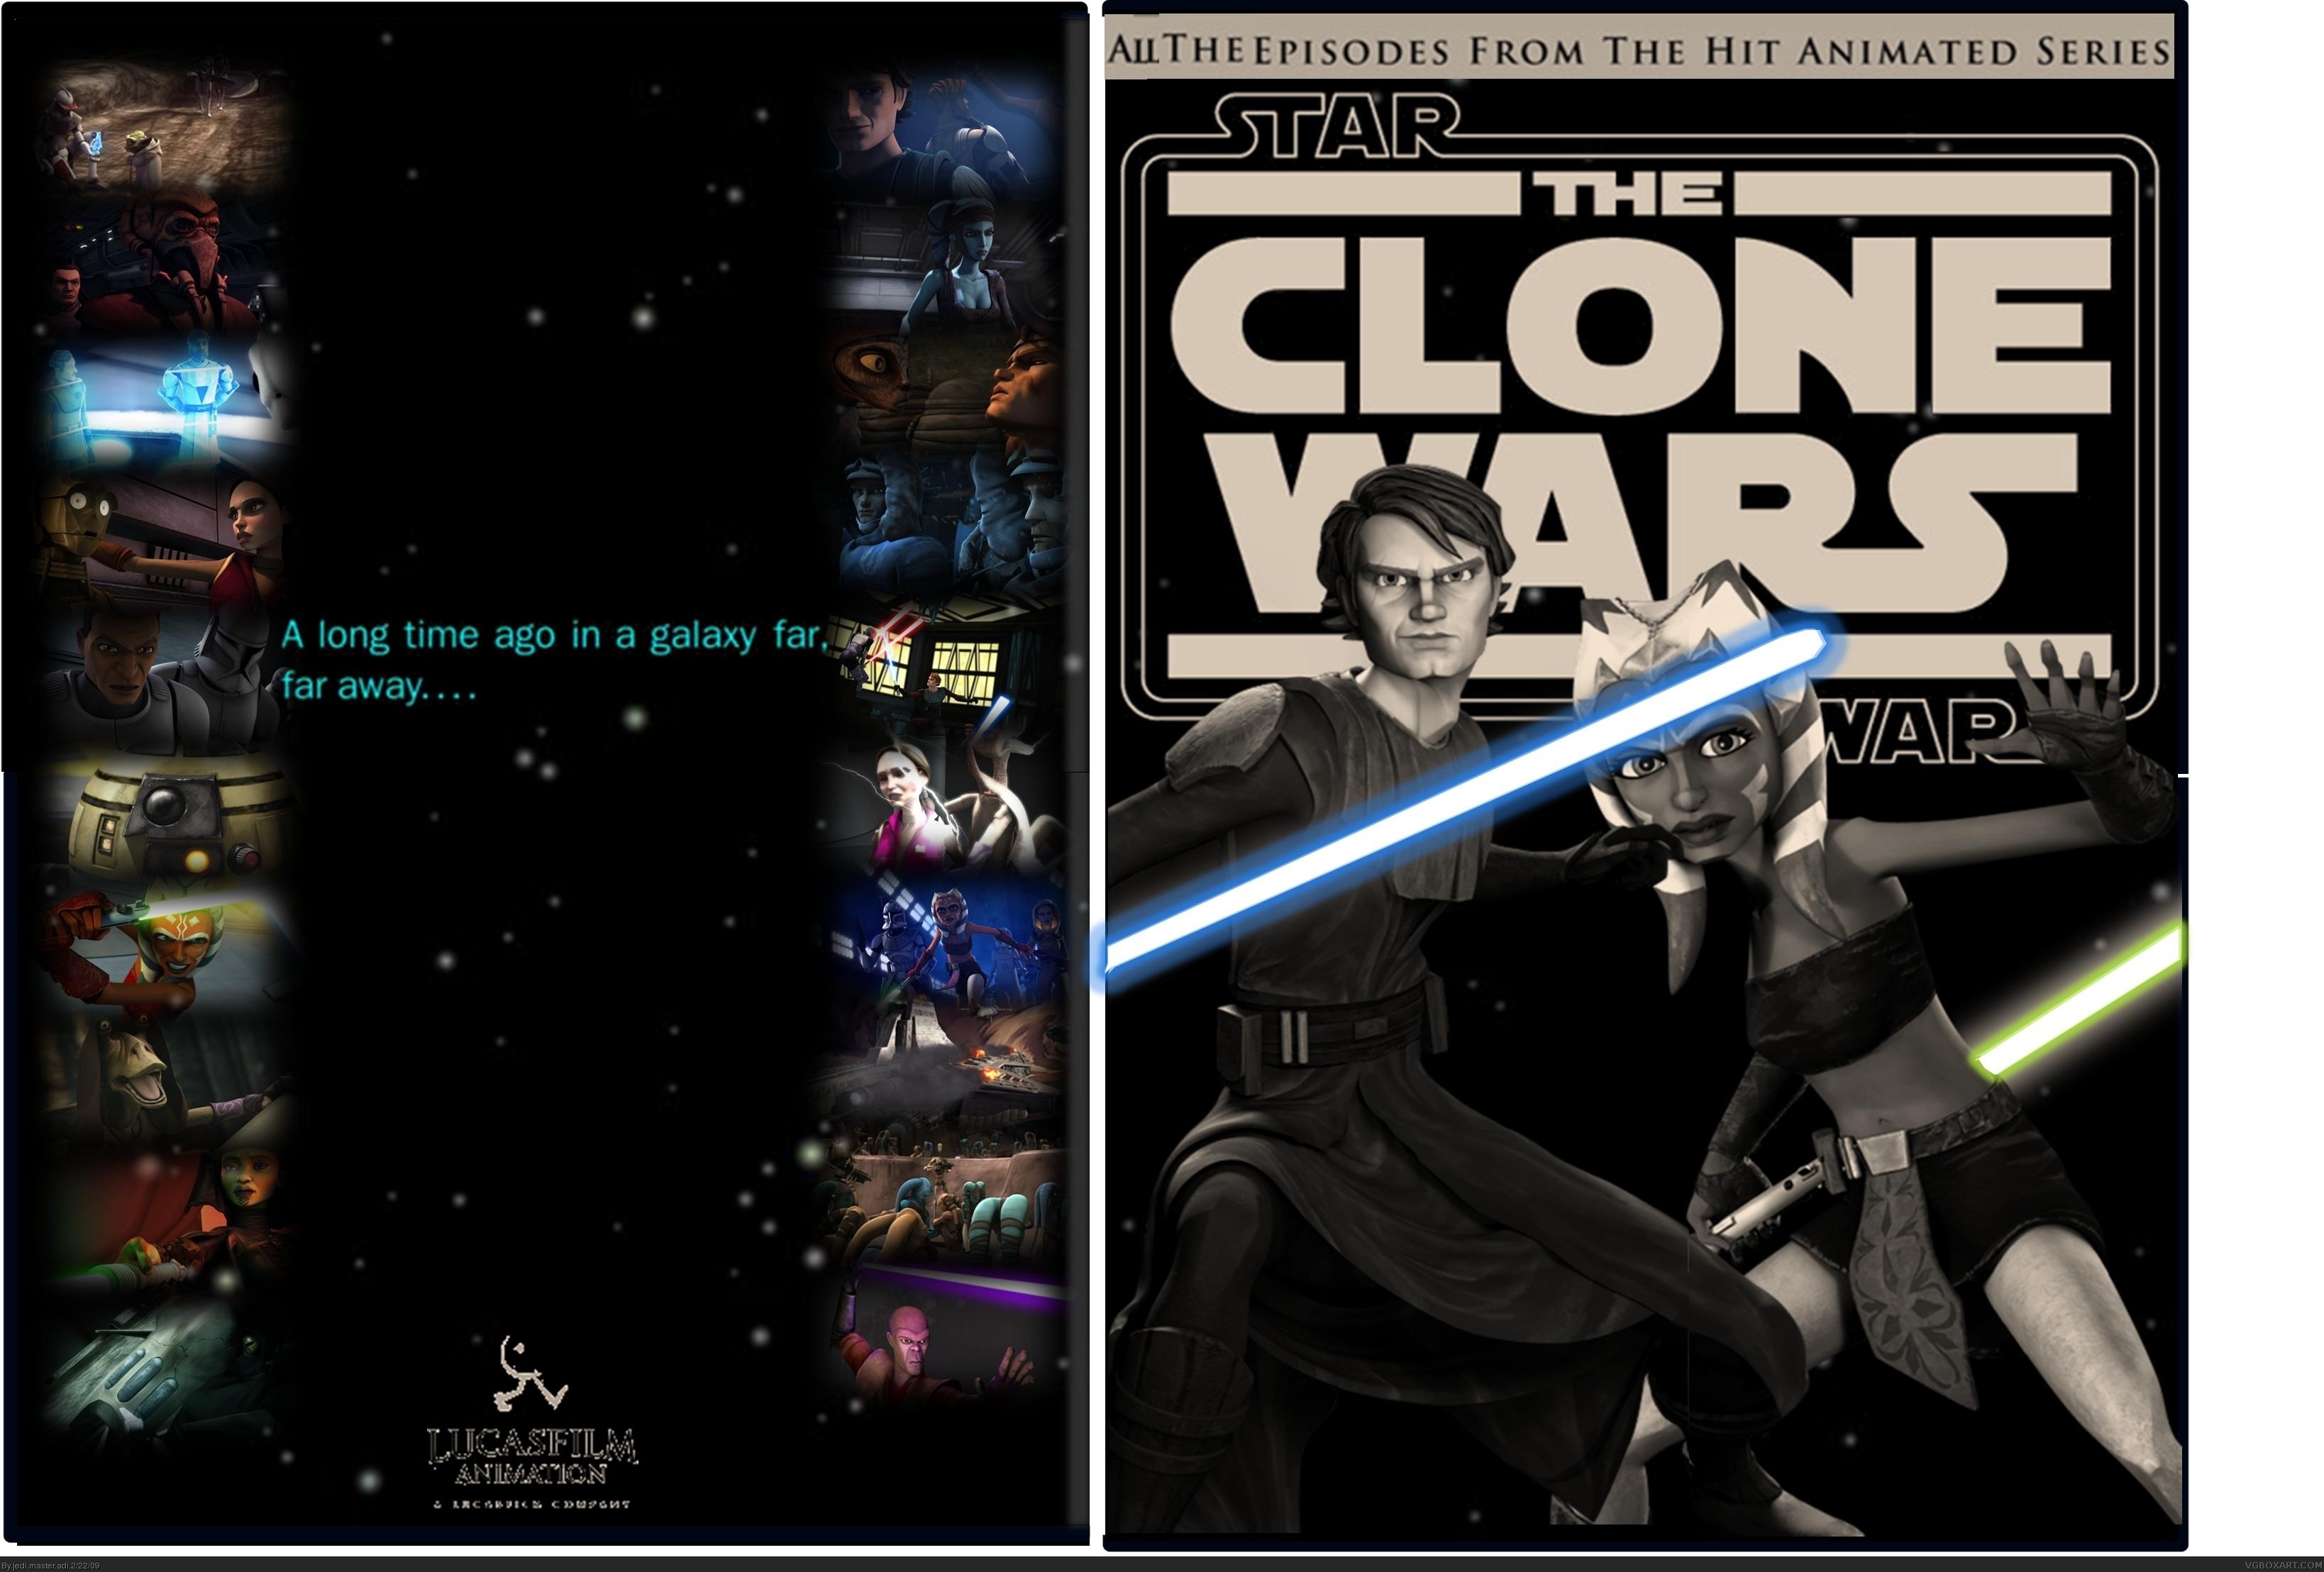 Star Wars: The Clone Wars 1st Series Collecter's Tin box cover